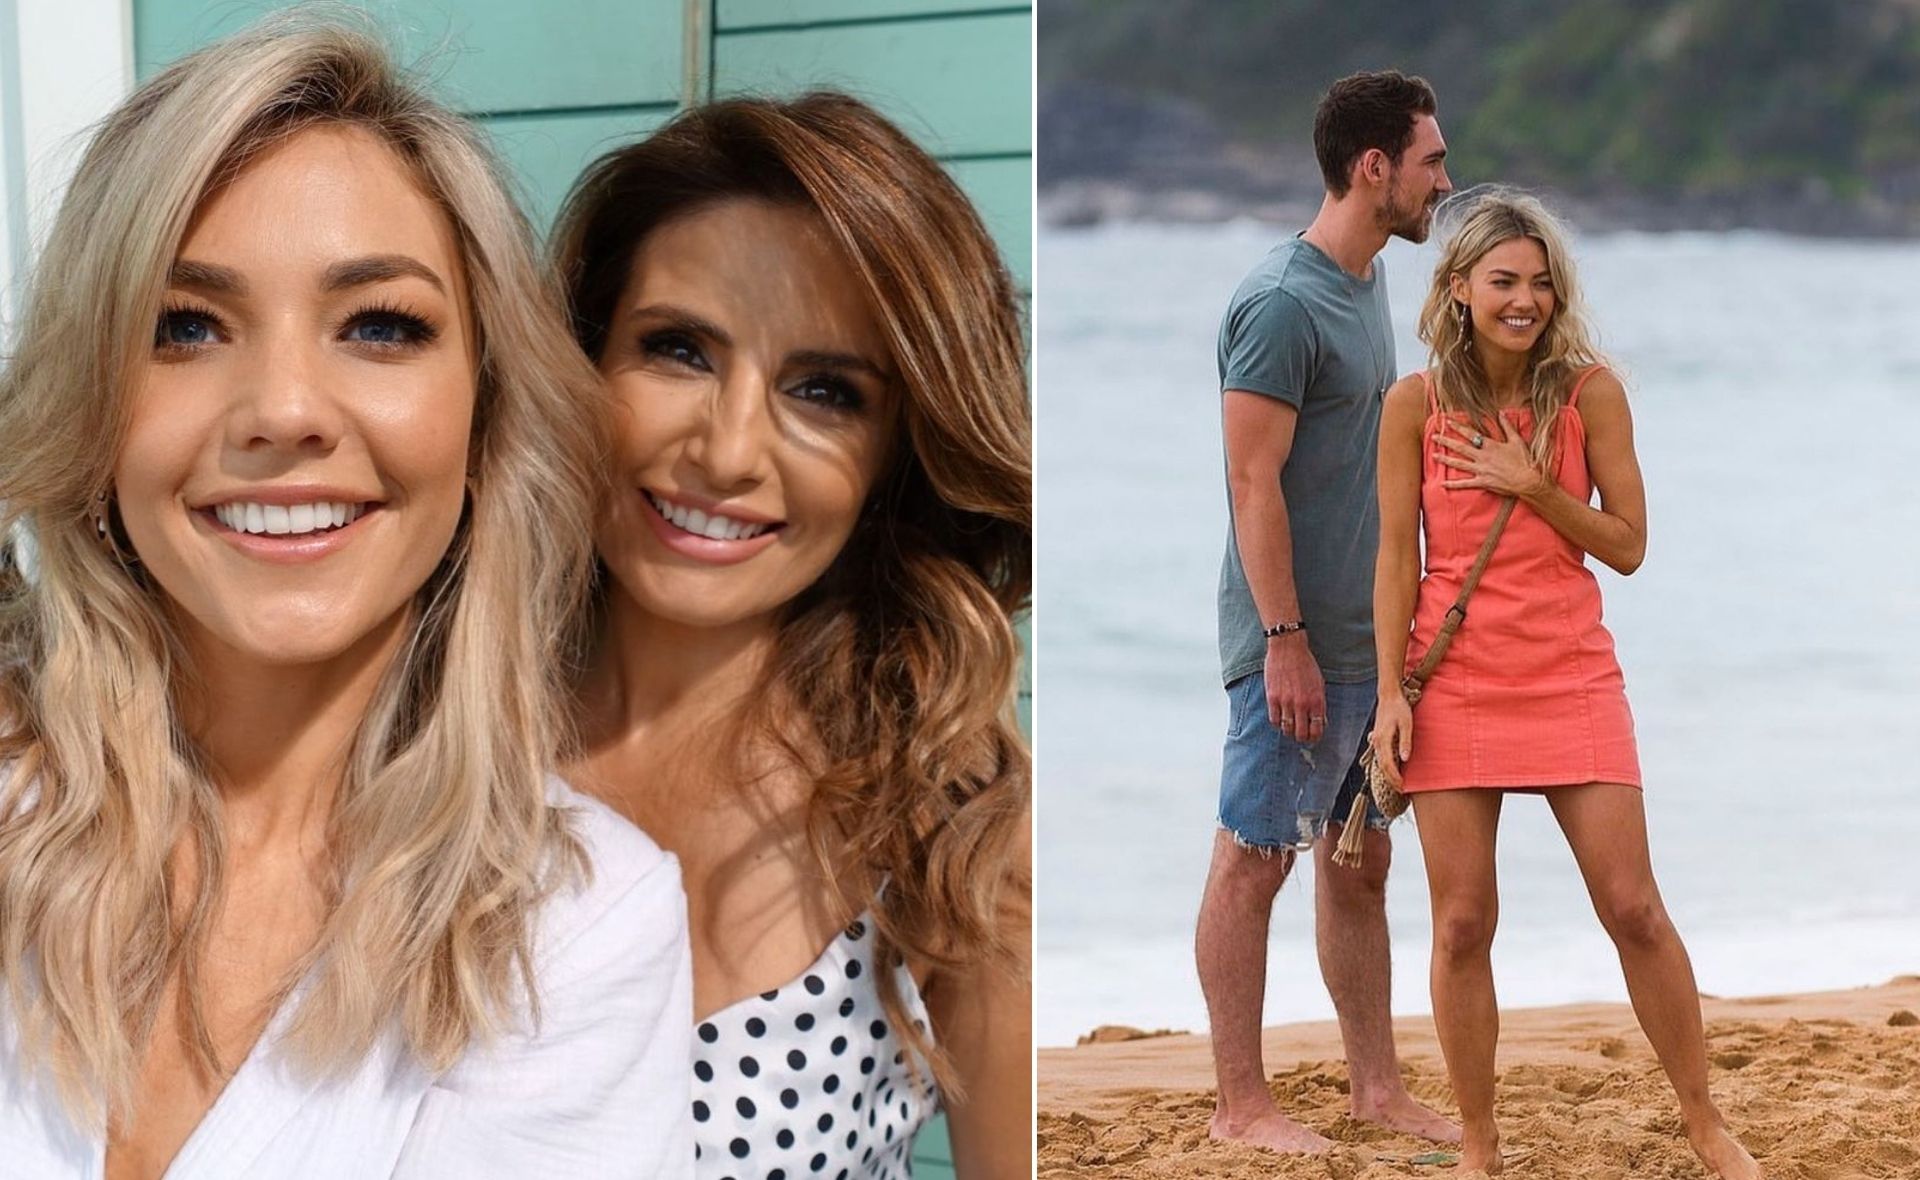 Sam Frost appears jovial on the Home and Away set despite the surrounding controversy regarding her unvaccinated status